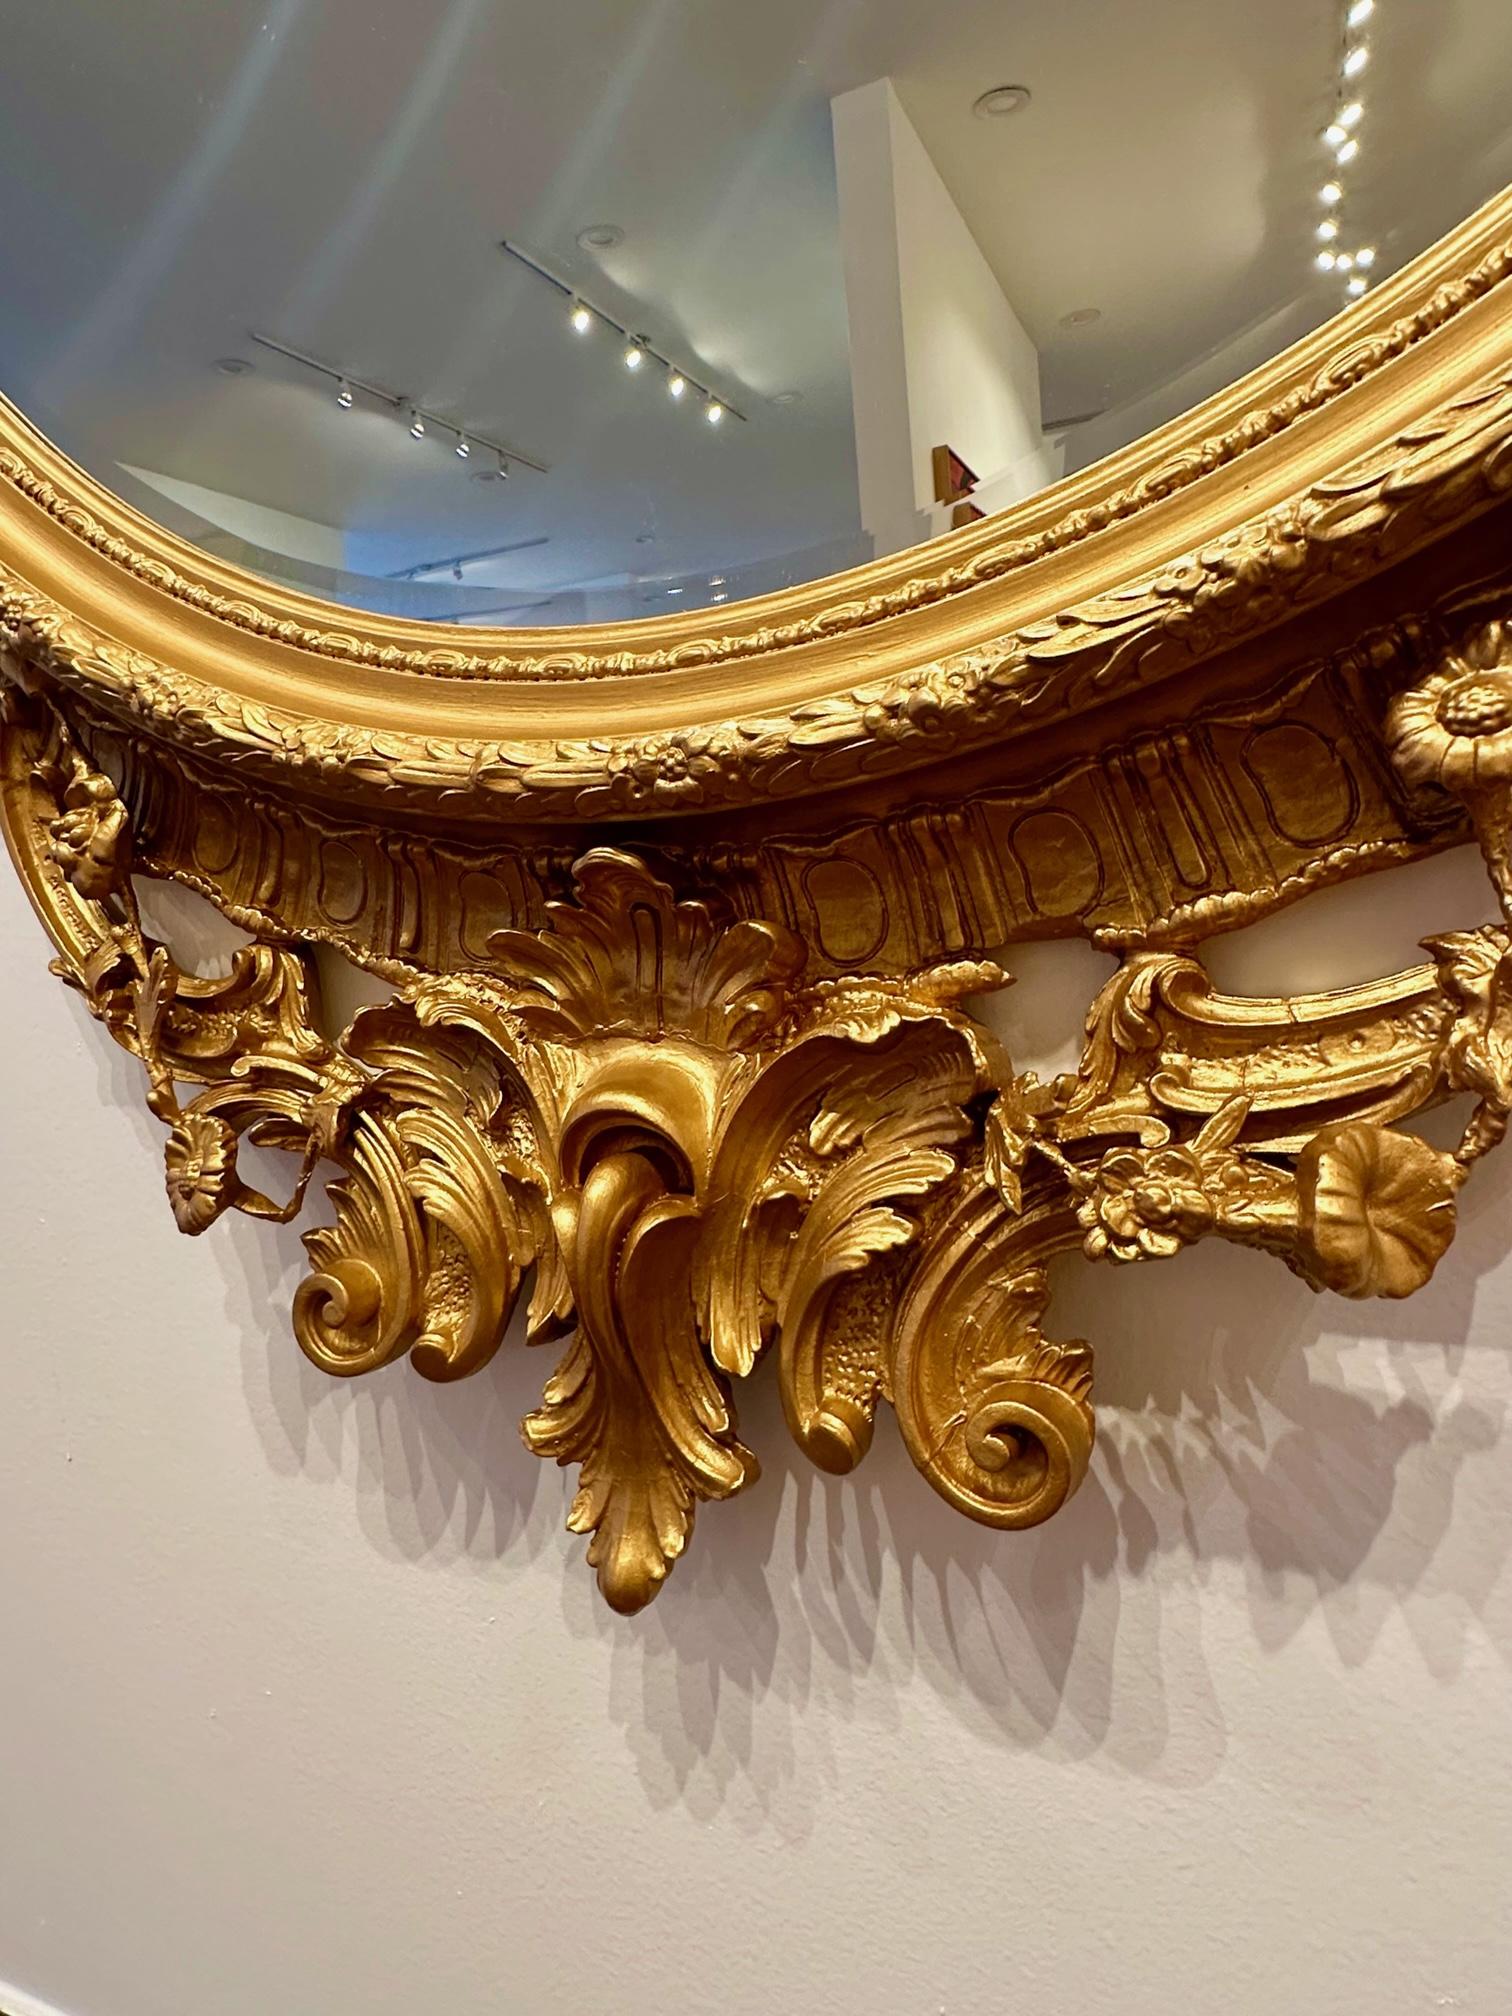 This large oval-shaped mirror is a rare find in all of its grandeur. The shear size is of this mirror is something to behold and appreciate as the ornate carvings and workings of the wood are a testament to the artisanal craftsmanship typical of the